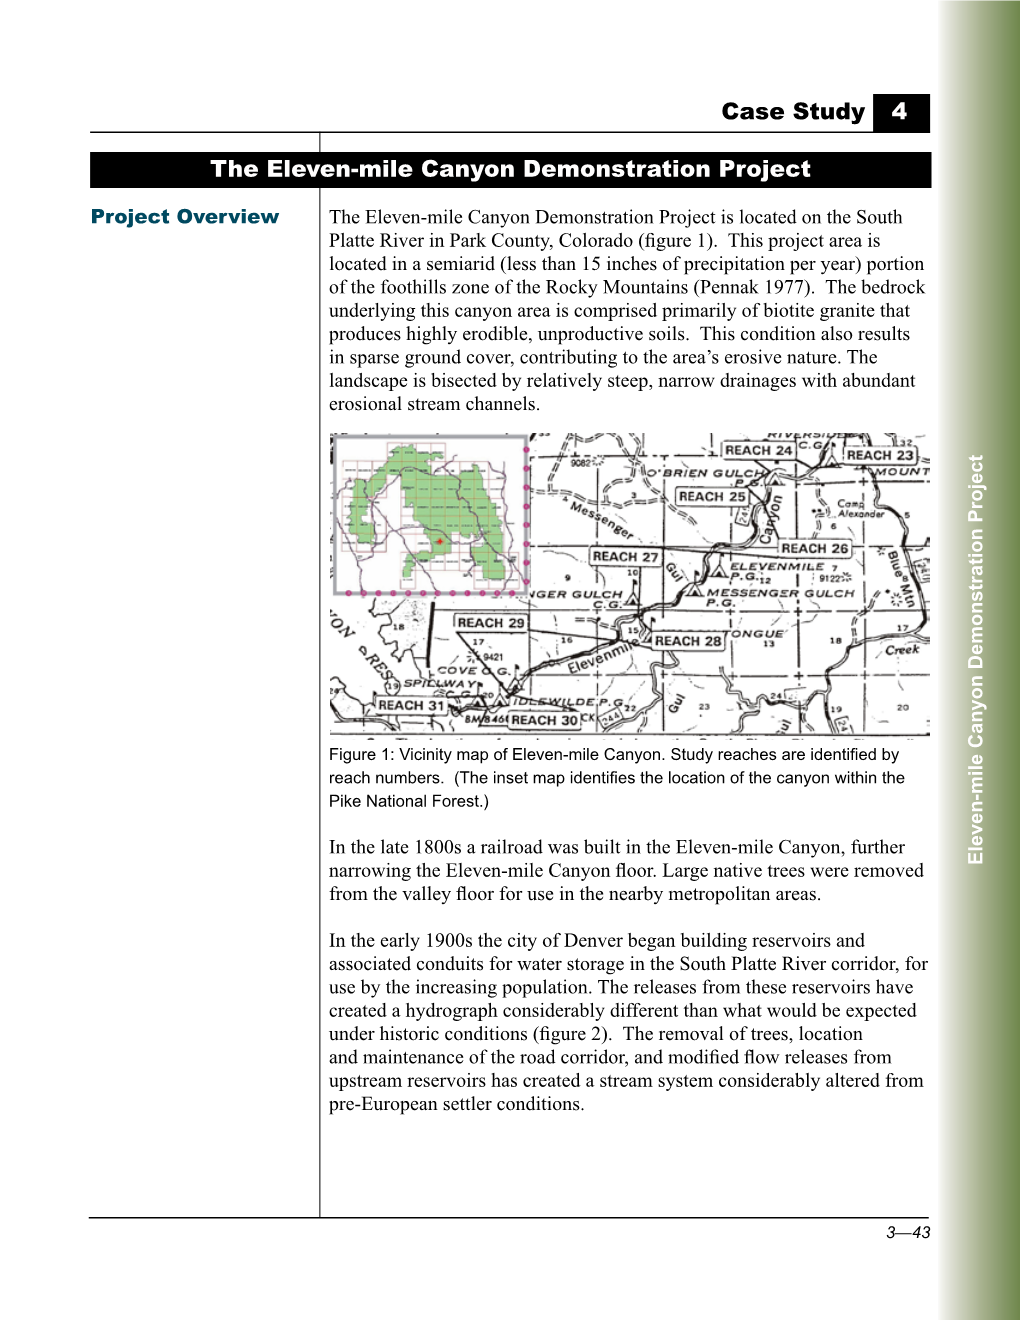 Eleven-Mile Canyon Demonstration Project